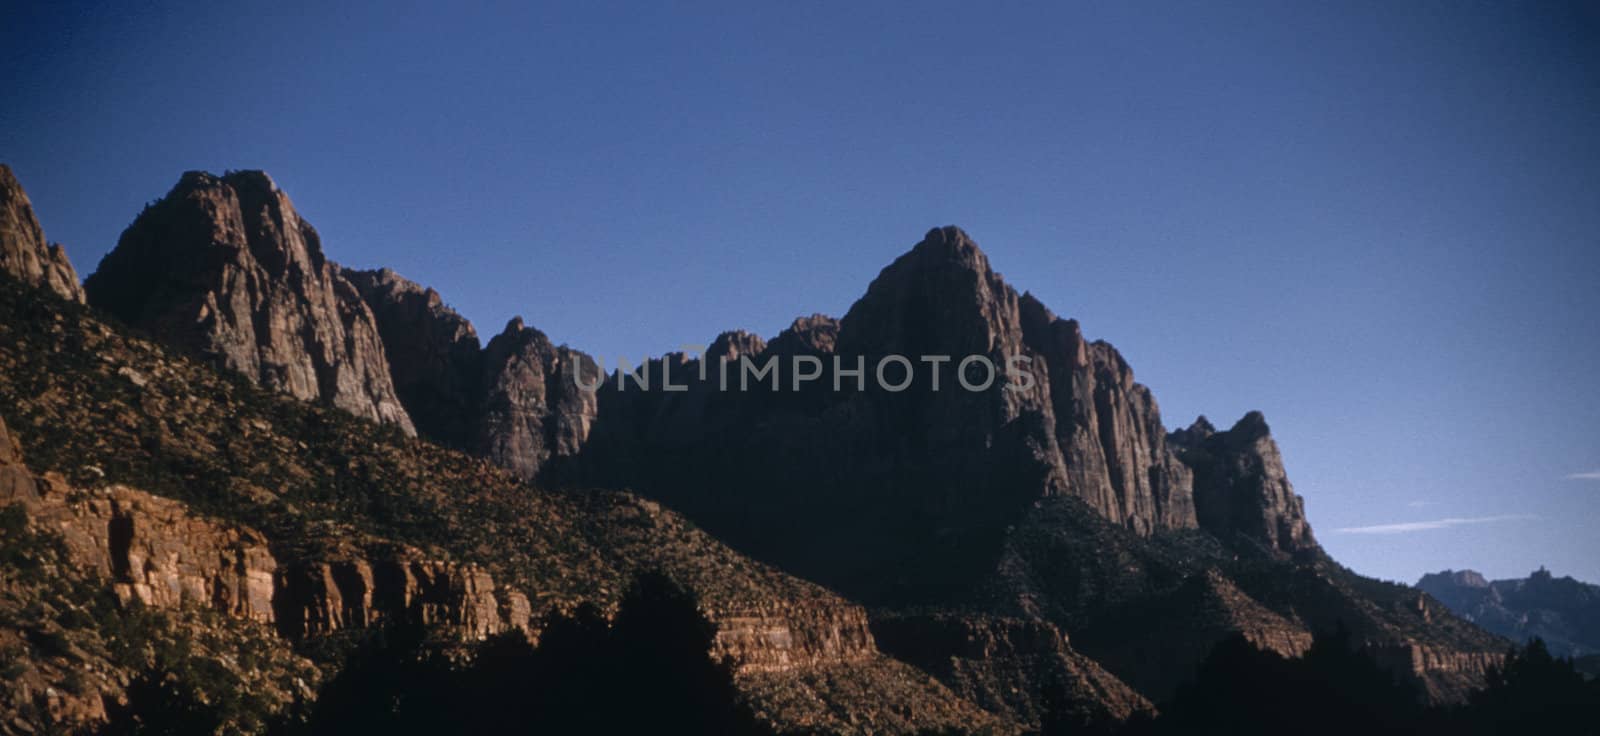 Vertical cliffs and rocky mountains in Zion National Park, Utah